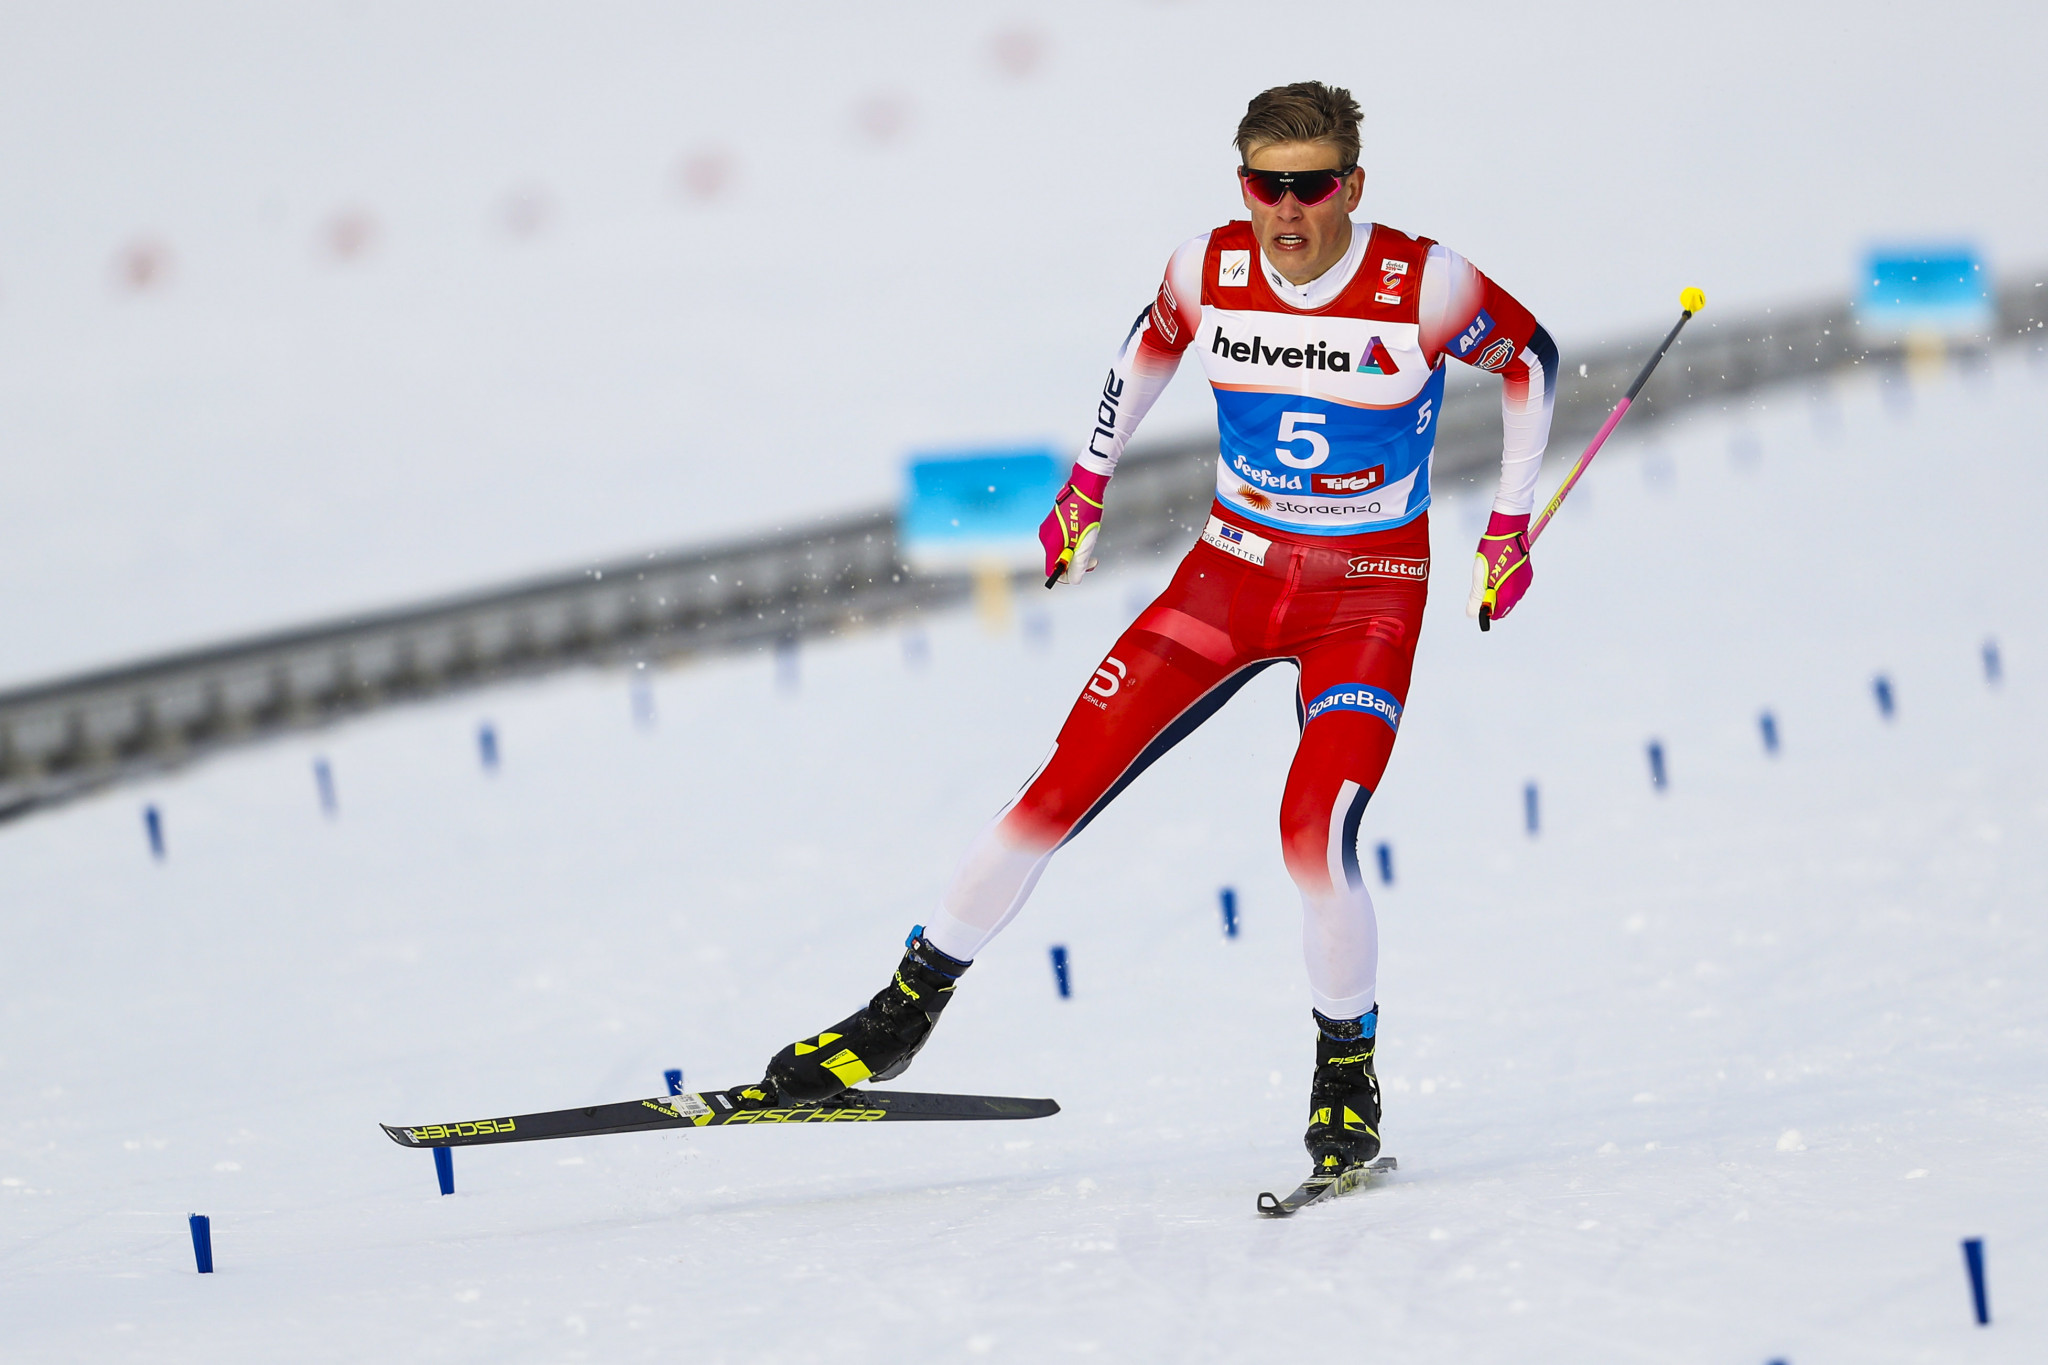 Norway gained their second gold when Johannes Hoesflot Klæbo continued his incredible form to win the men's race ©Getty Images